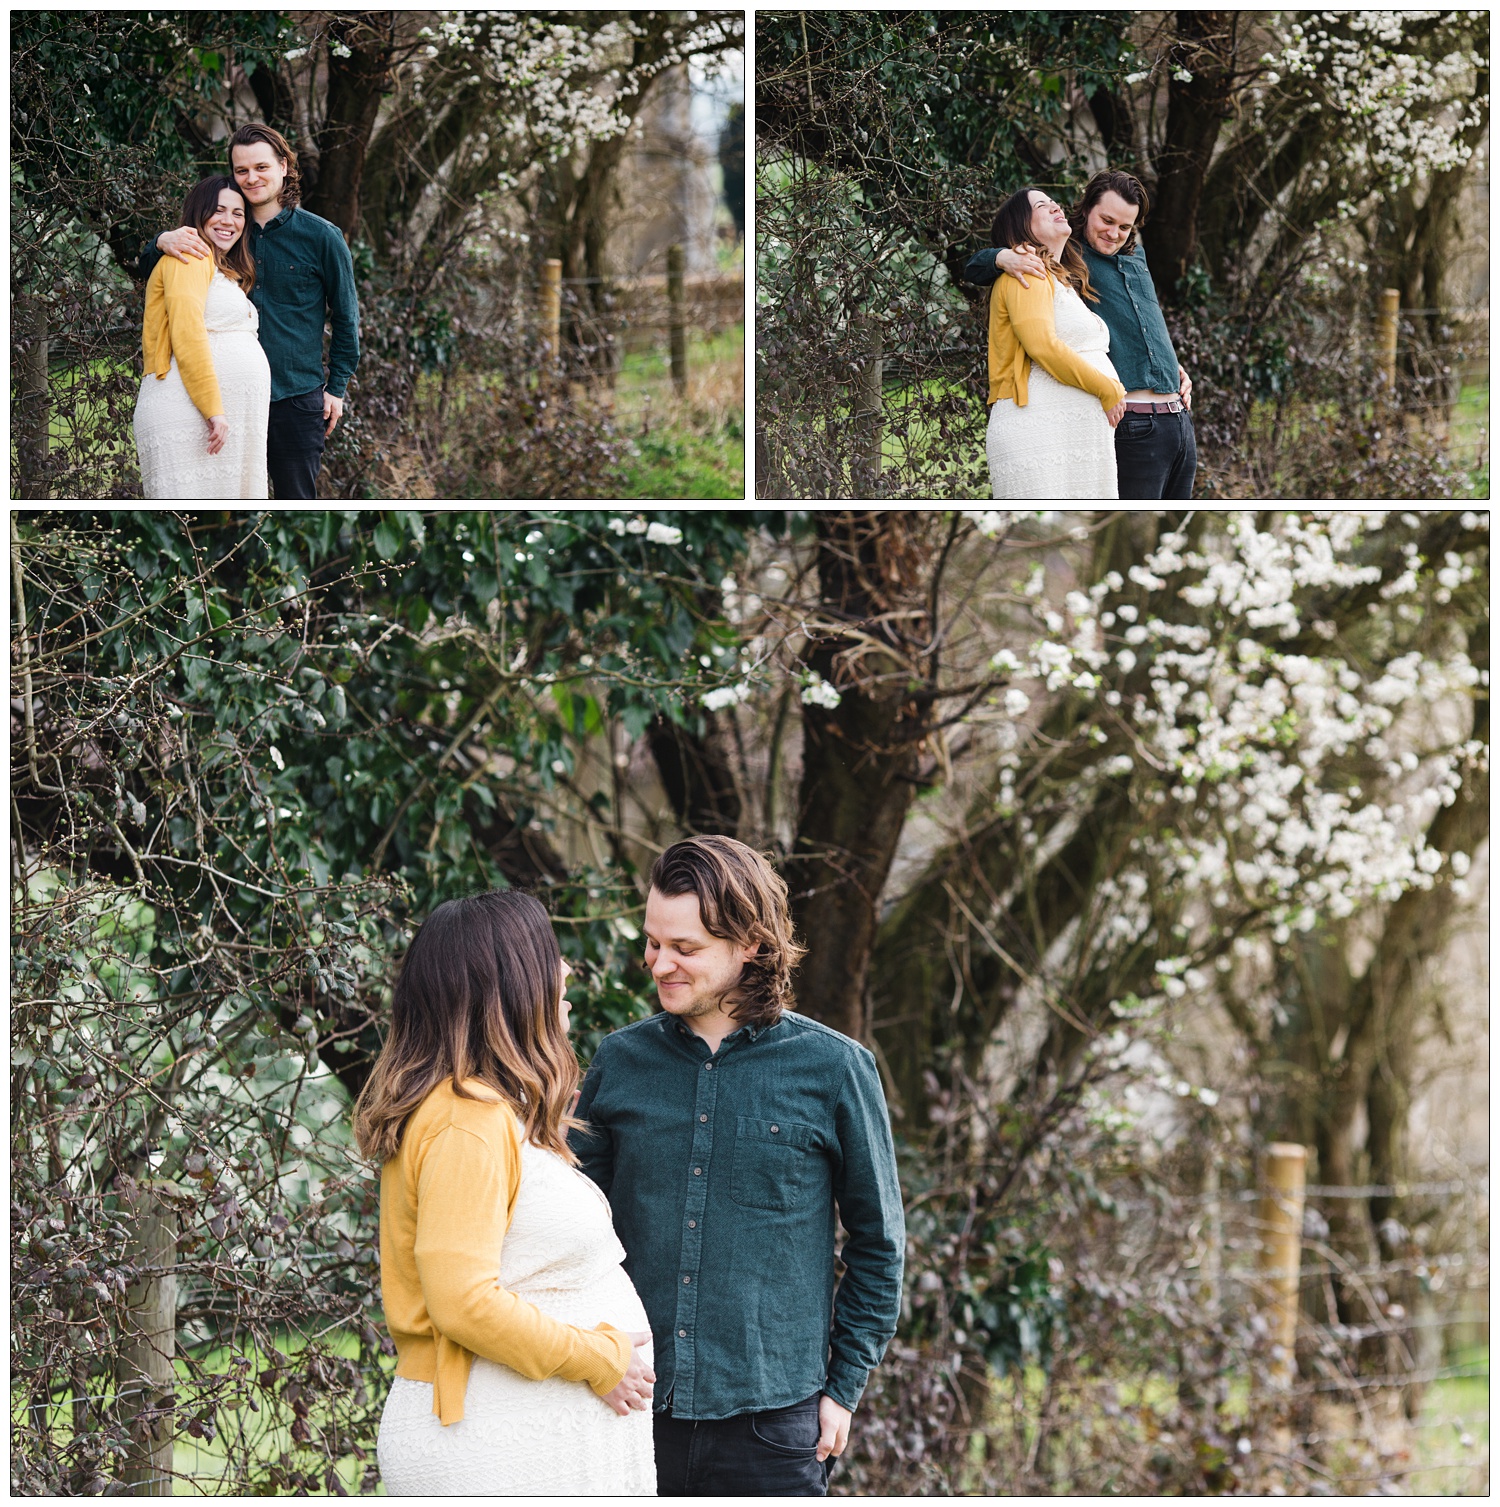 Pregnant woman and her husband in a field, there is blossom on the trees